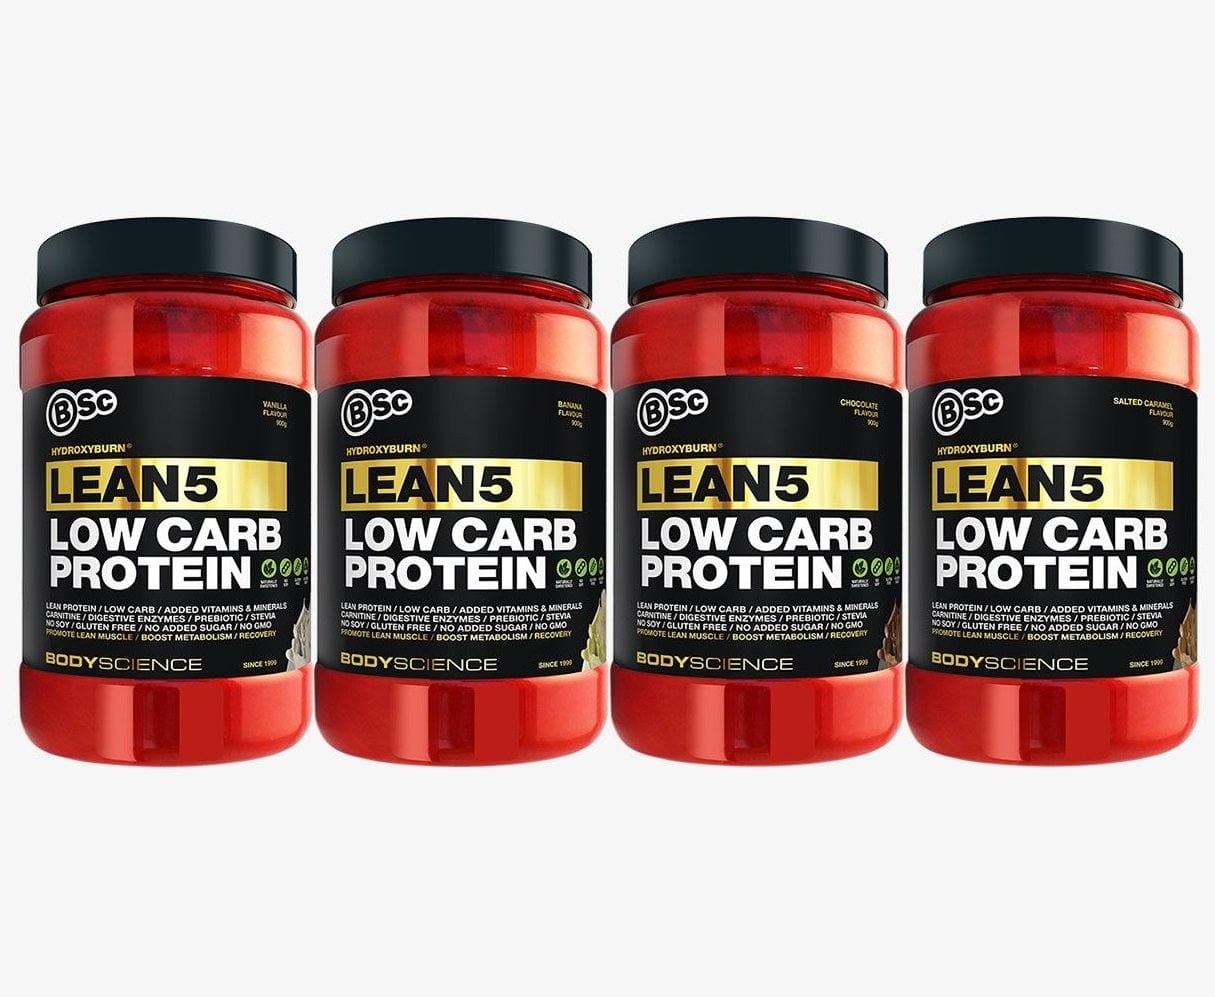 BSC HydroxyBurn Lean5 Low Carb Protein - Musclemania Fitness MegaStore